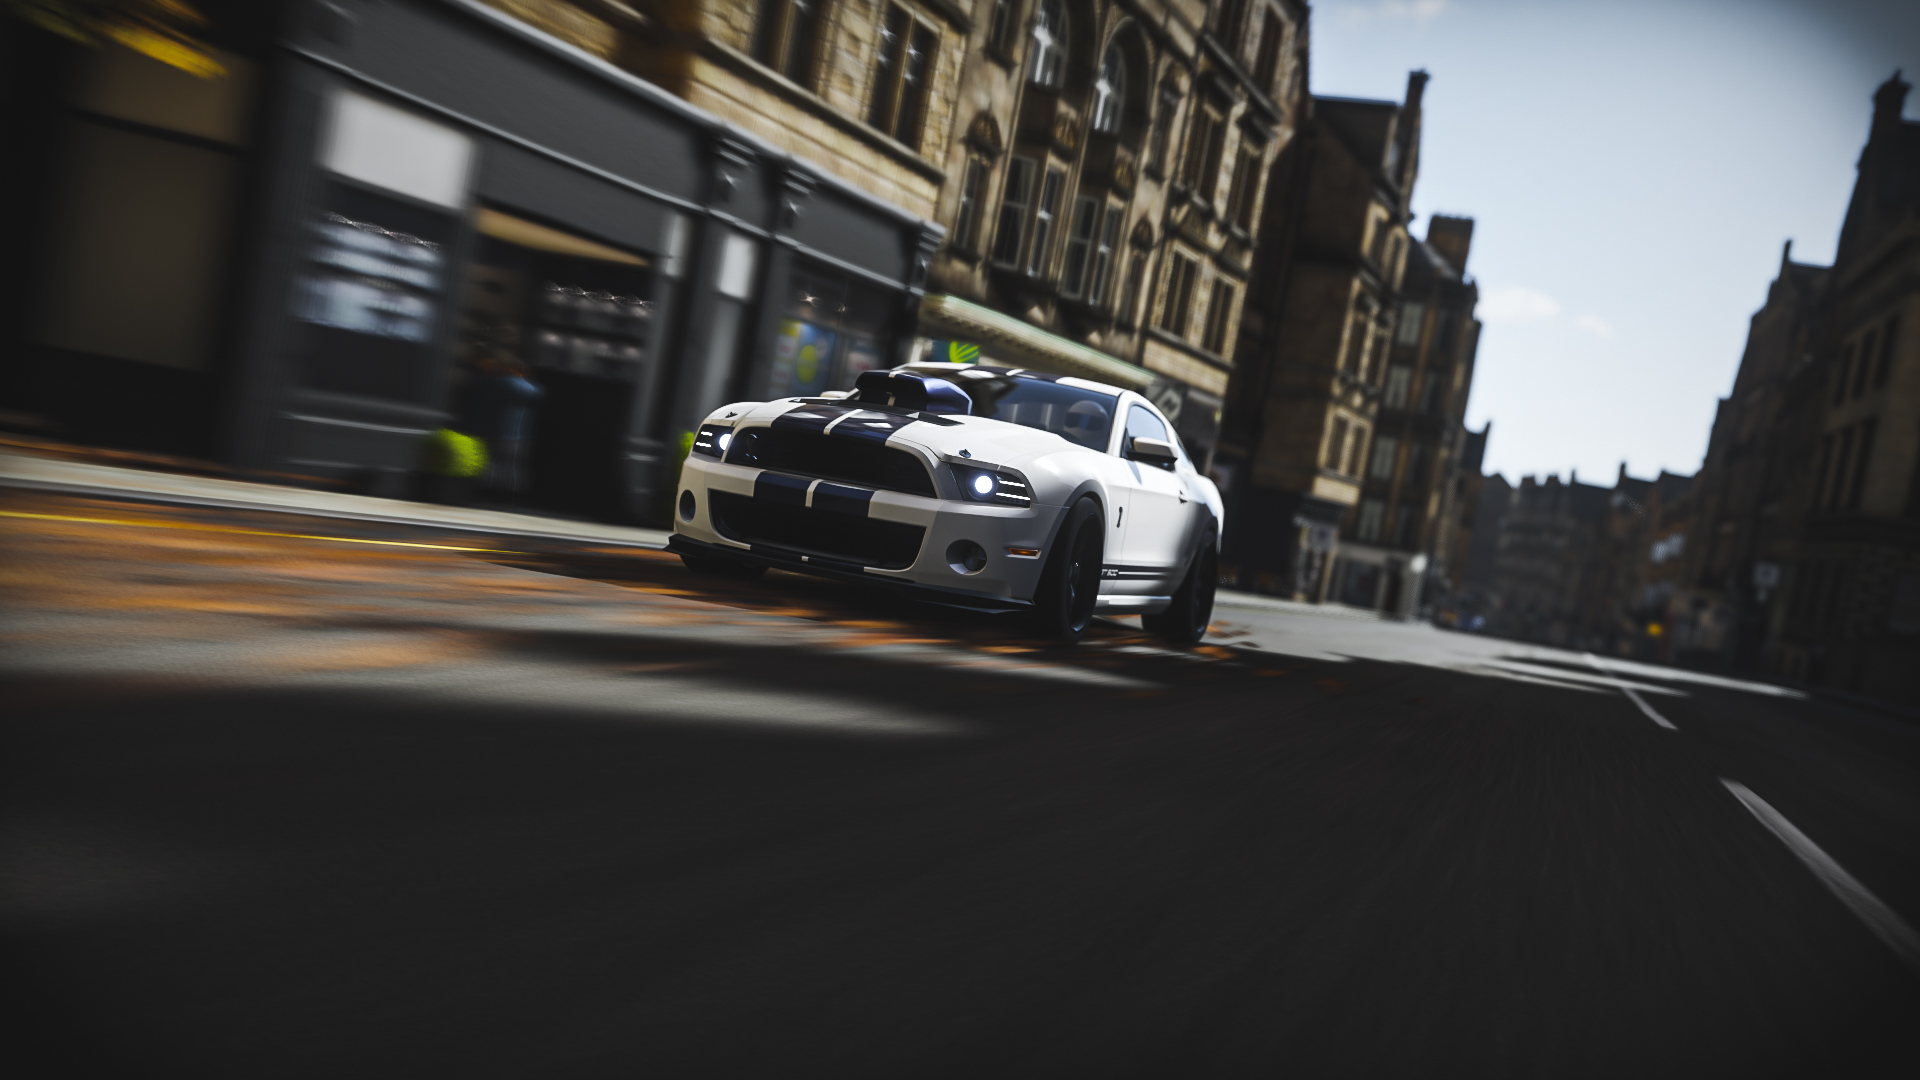 General 1920x1080 Ford Mustang Shelby Ford Ford Mustang Forza Forza Horizon 4 video games car Shelby white cars racing stripes Ford Mustang S-197 II